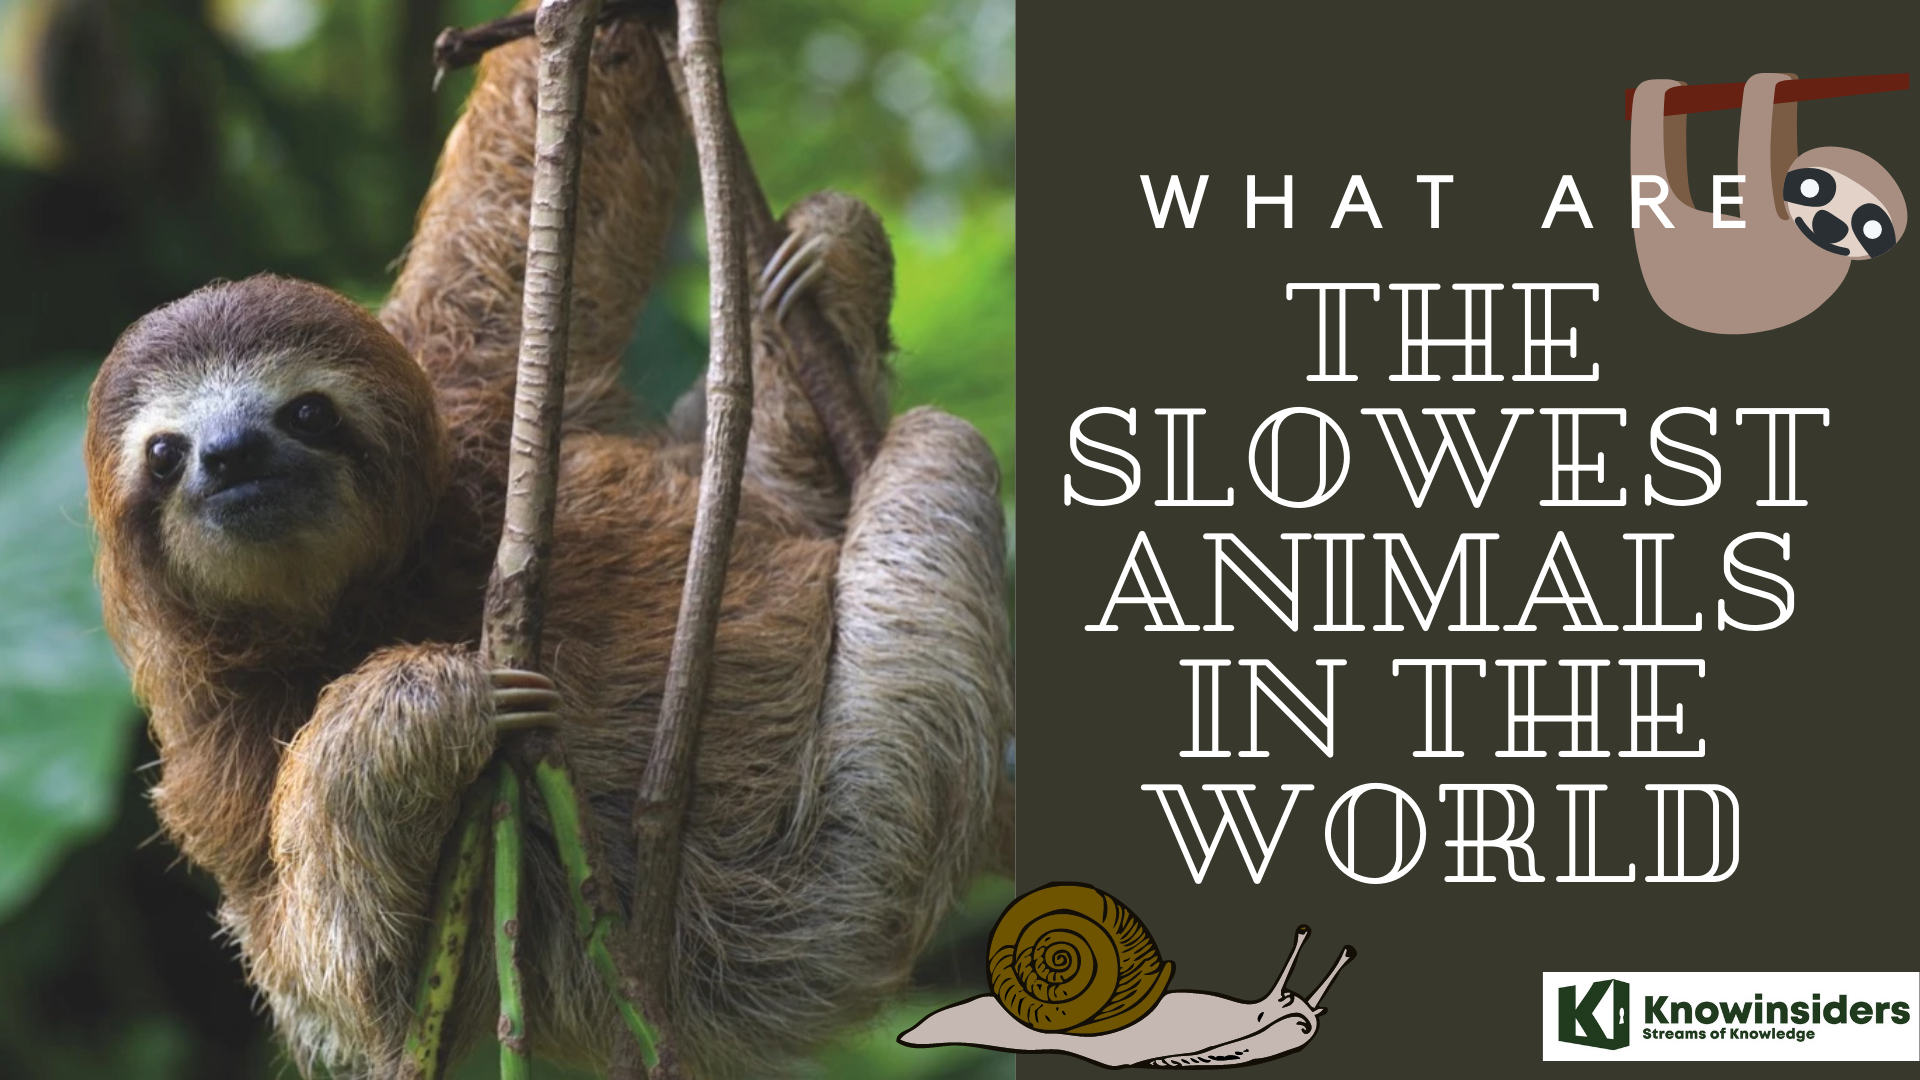 Amazing Facts About The Slowest Animals In The World